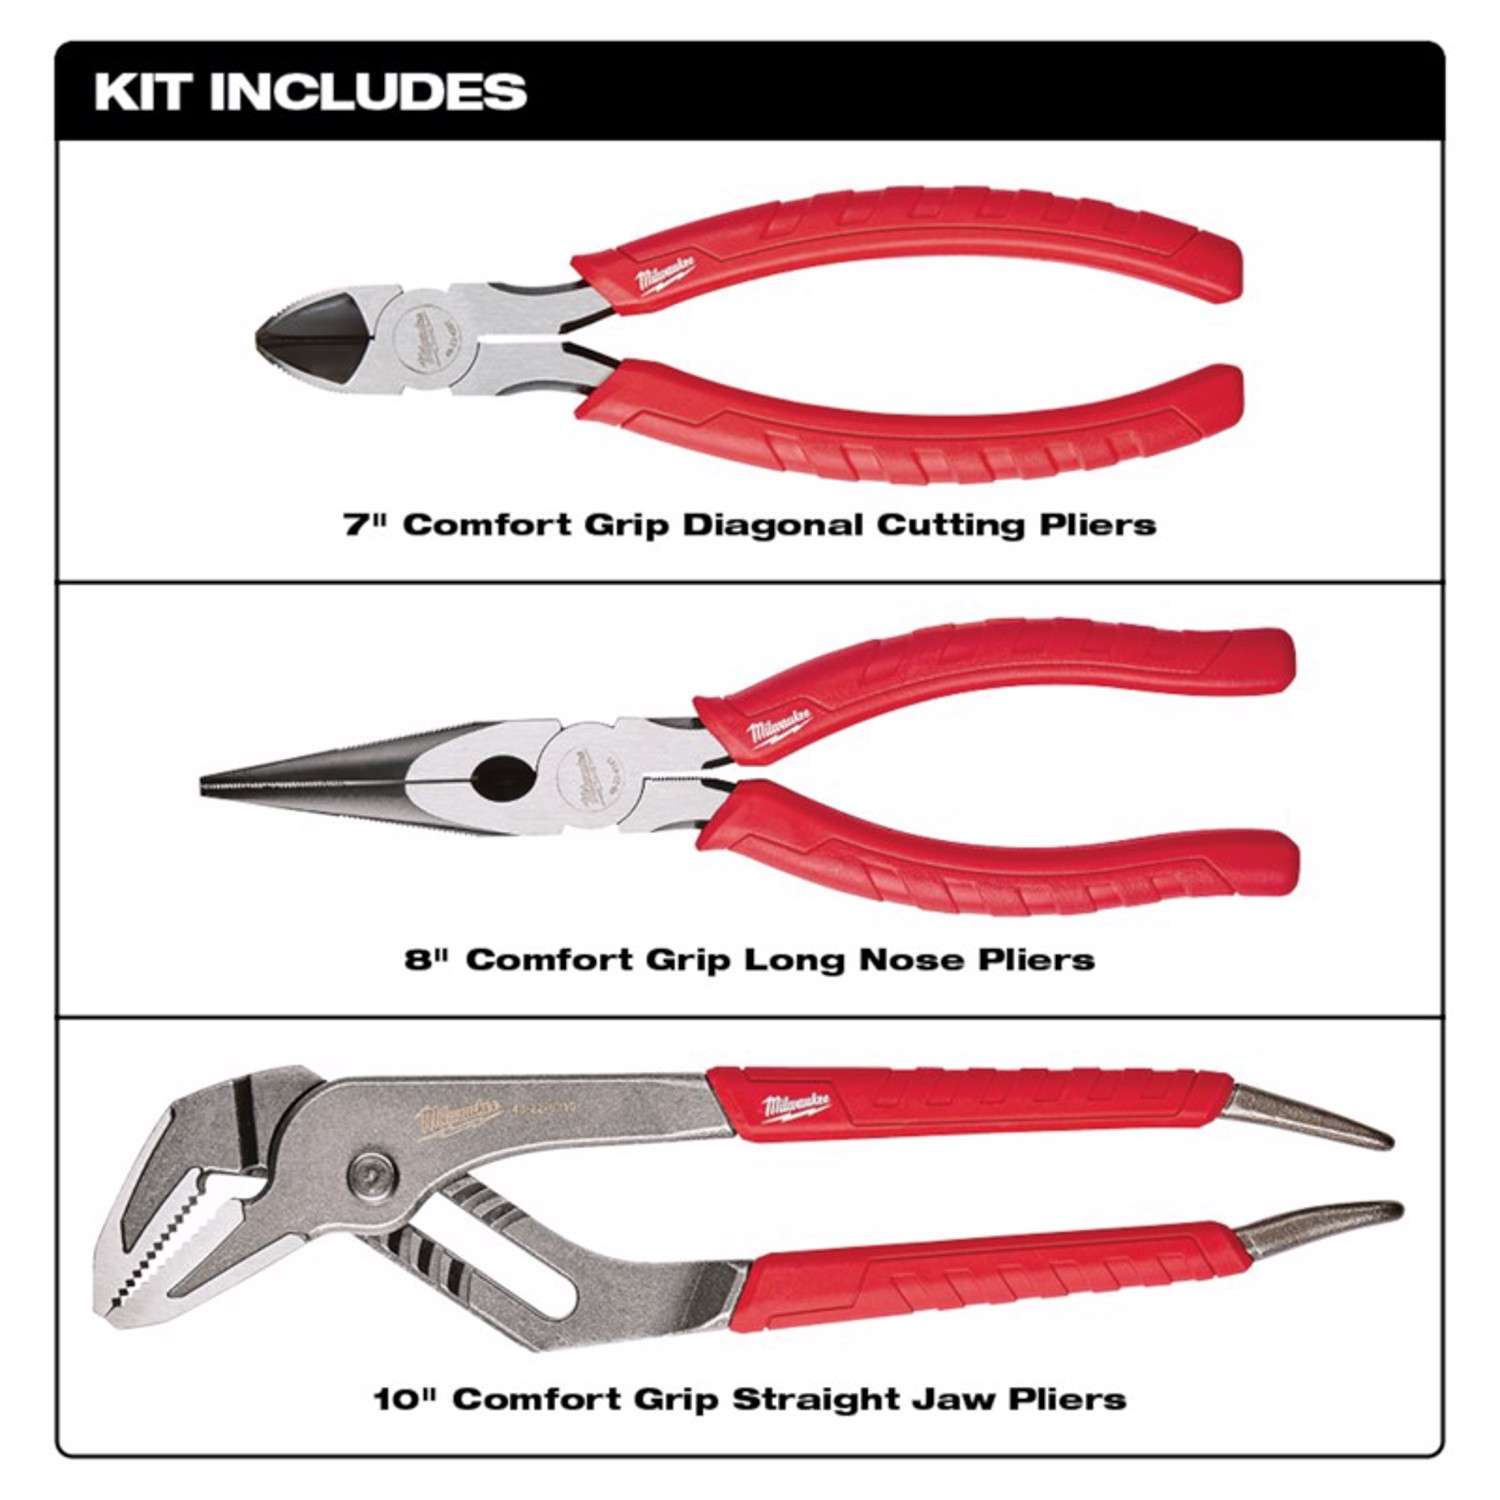 Brake Spring Pliers - NWS - The pliers with function, quality + design.